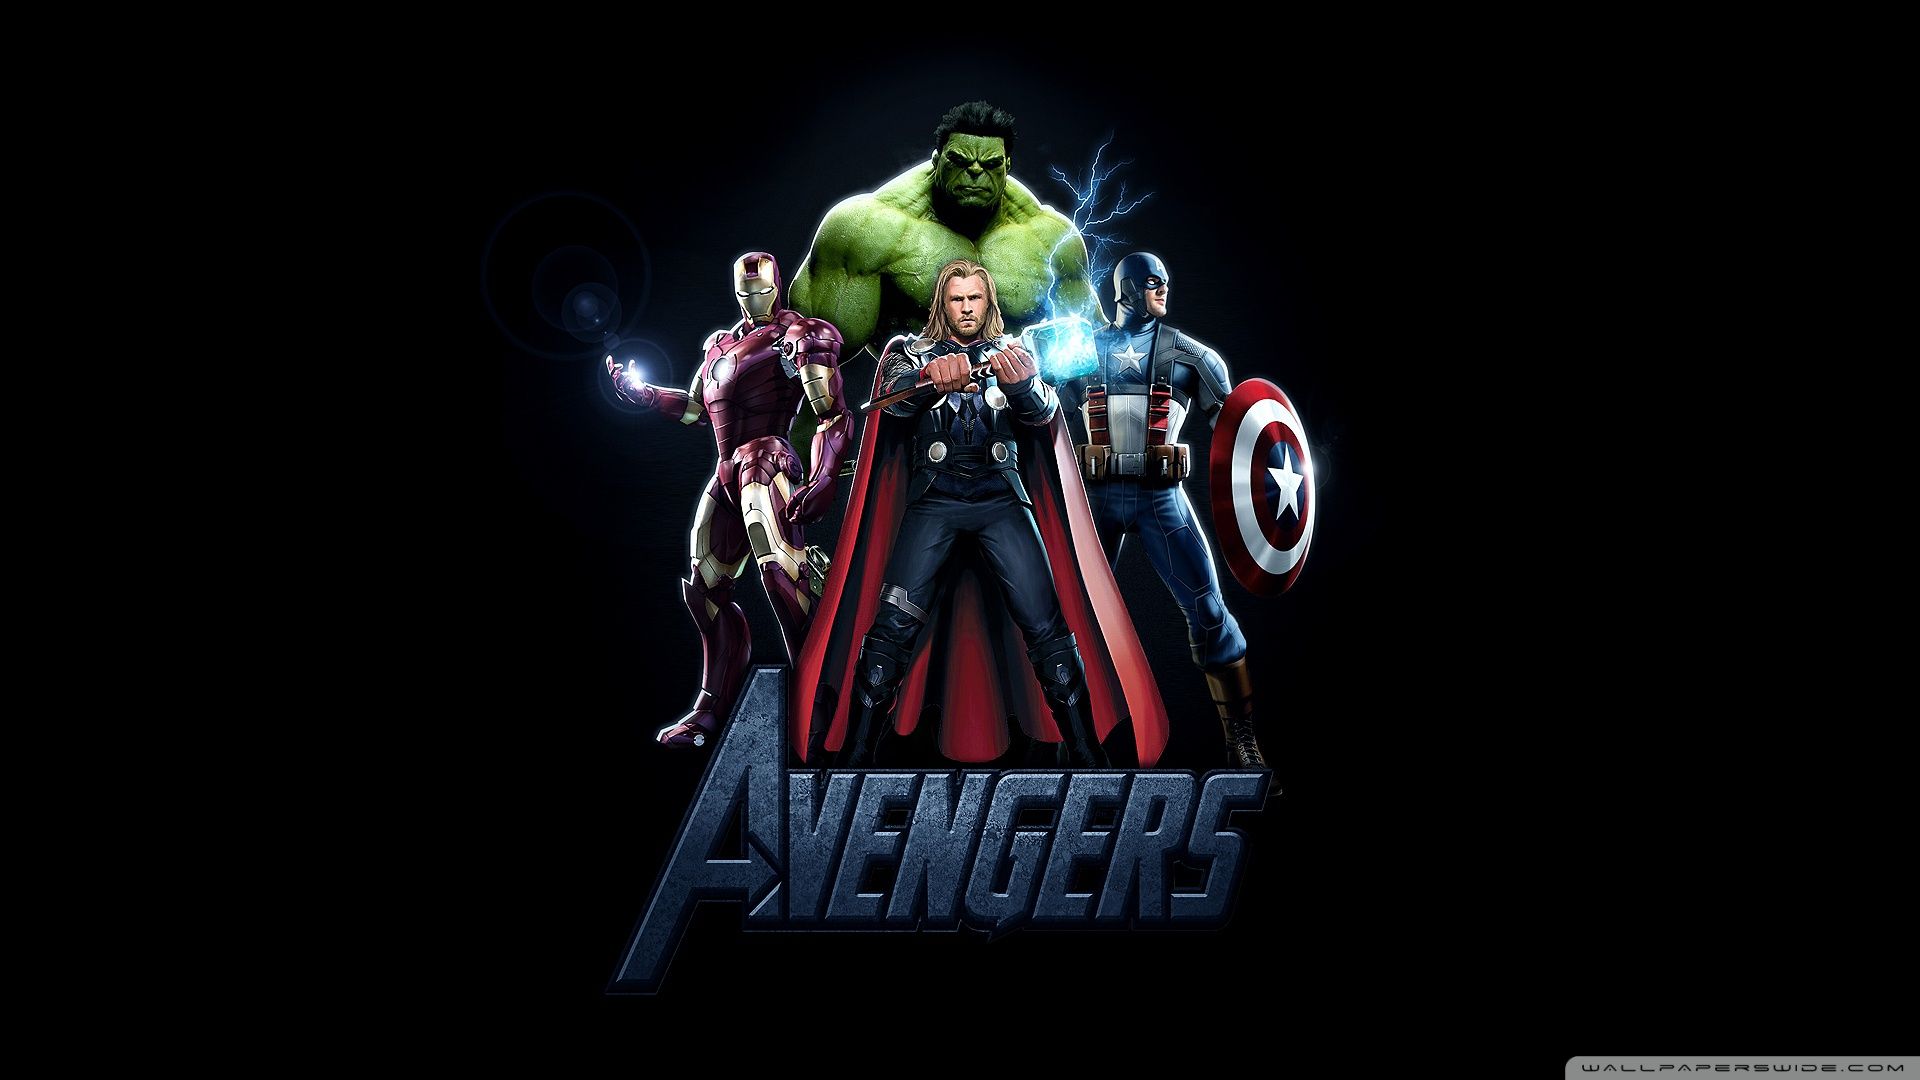 Best 54+ The Avengers Backgrounds on HipWallpapers